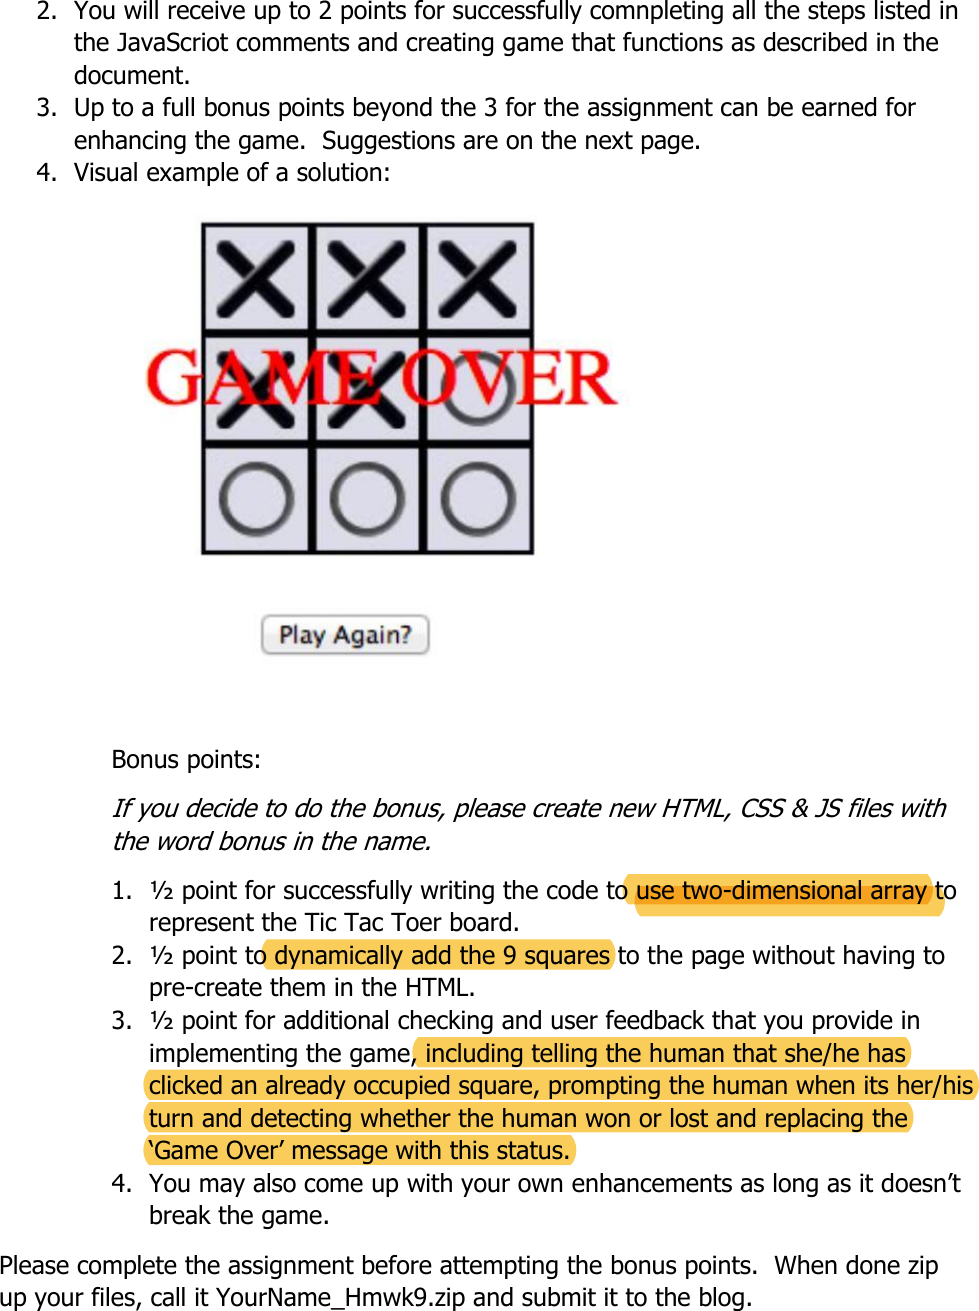 Page 2 of 2 - Tic Tac Toe Instructions